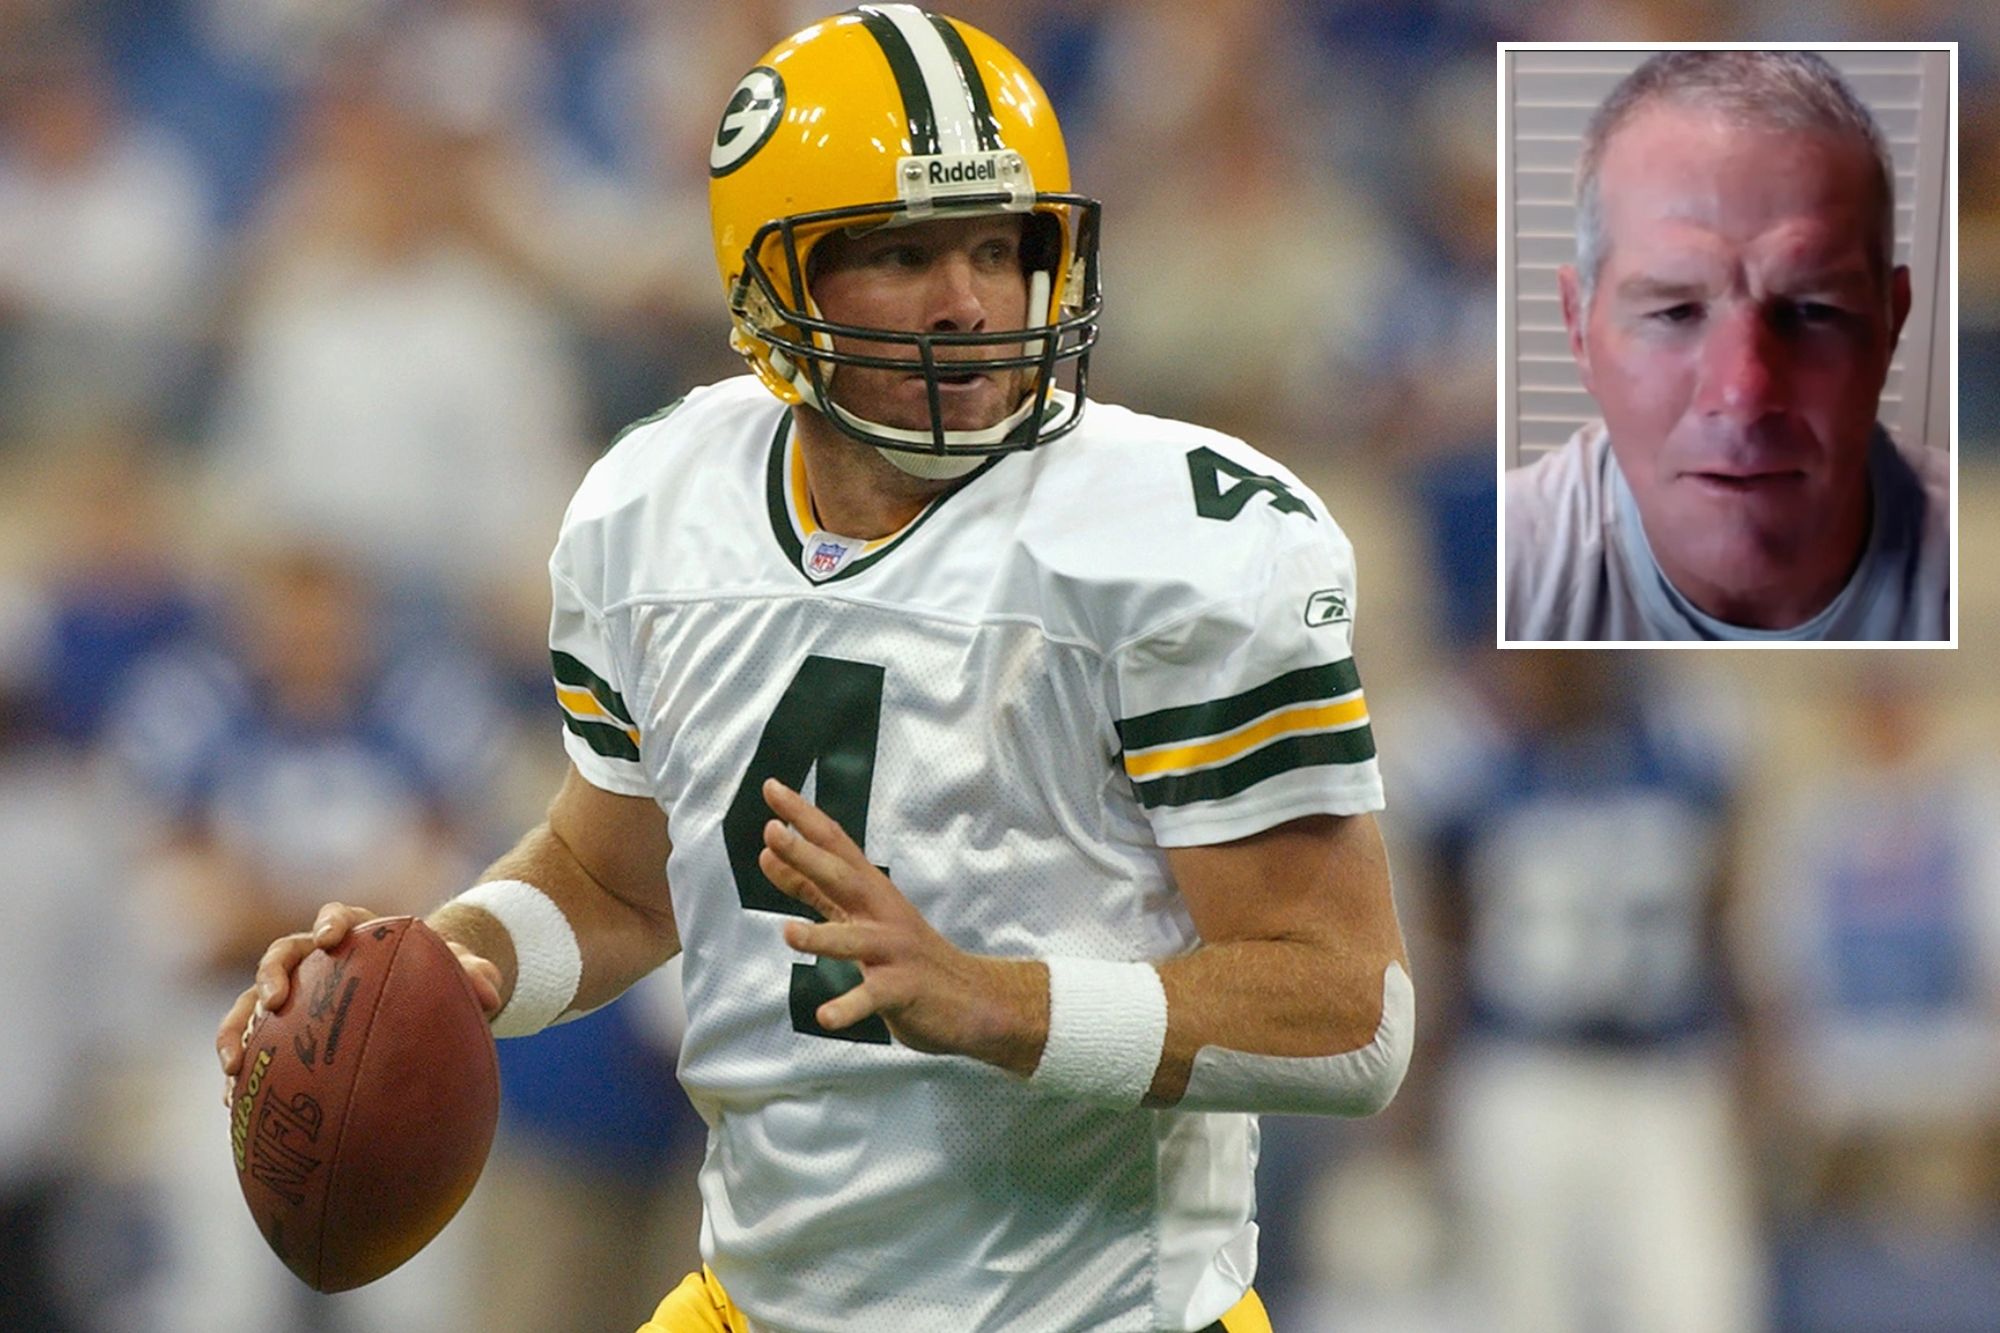 Brett Favre estimates the number of concussions he's had during NFL career